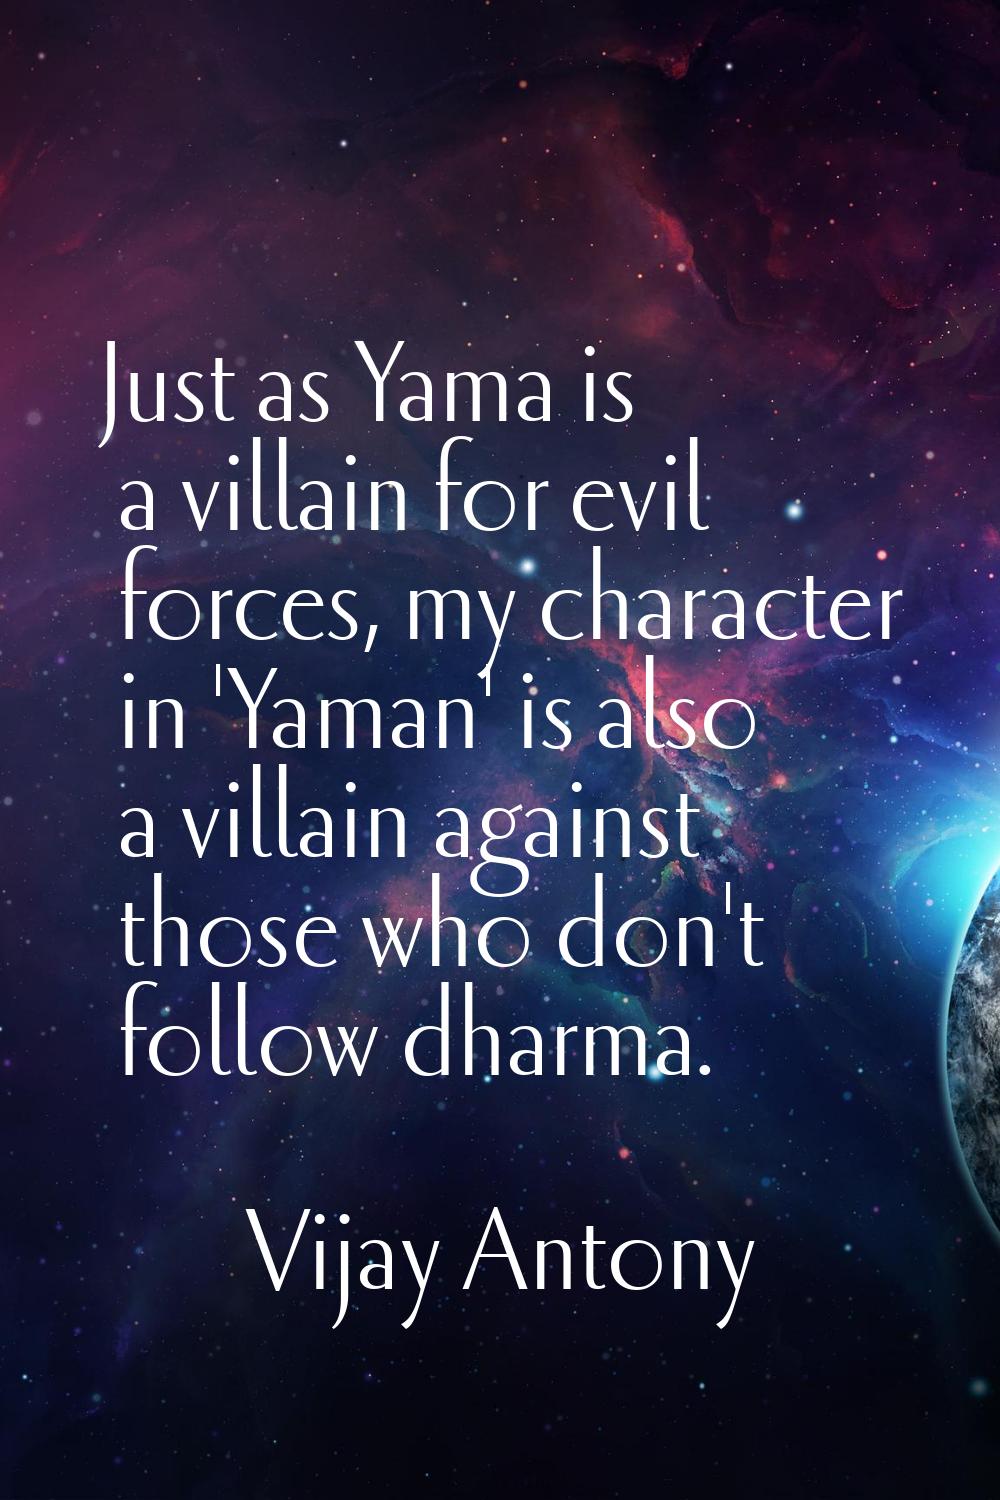 Just as Yama is a villain for evil forces, my character in 'Yaman' is also a villain against those 